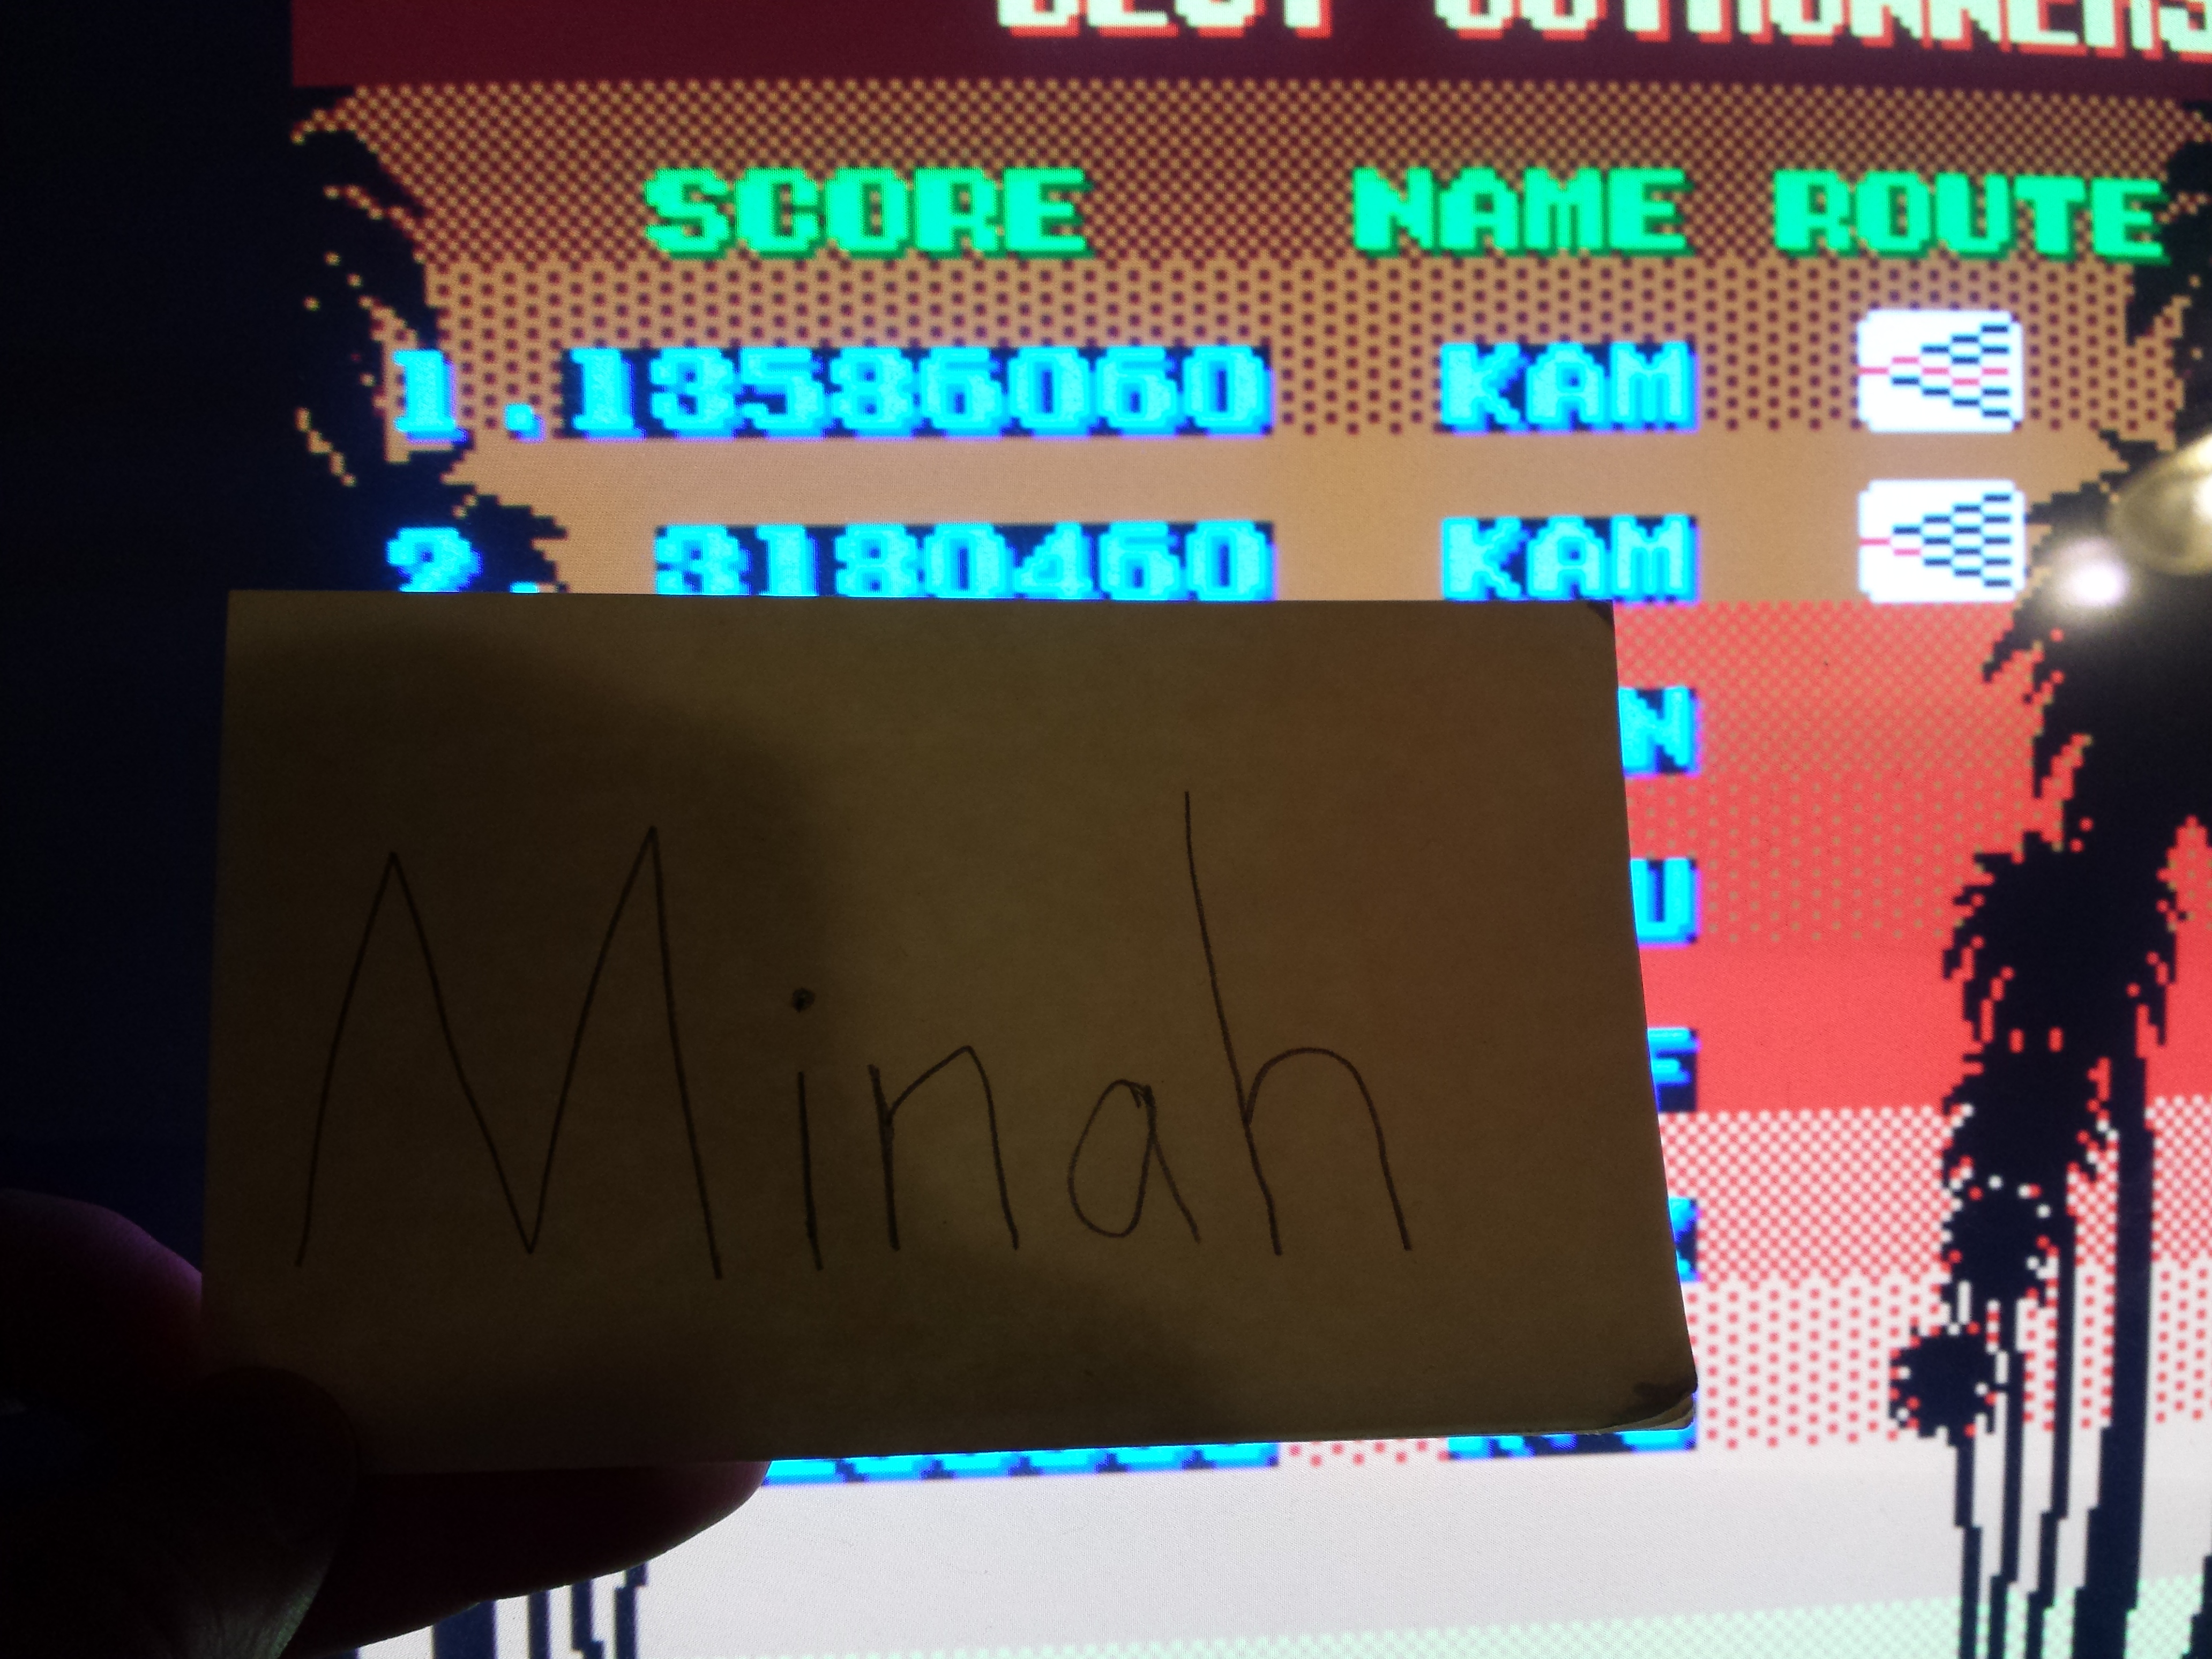 minah: Outrun (Sega Master System Emulated) 13,586,060 points on 2014-07-29 21:03:53